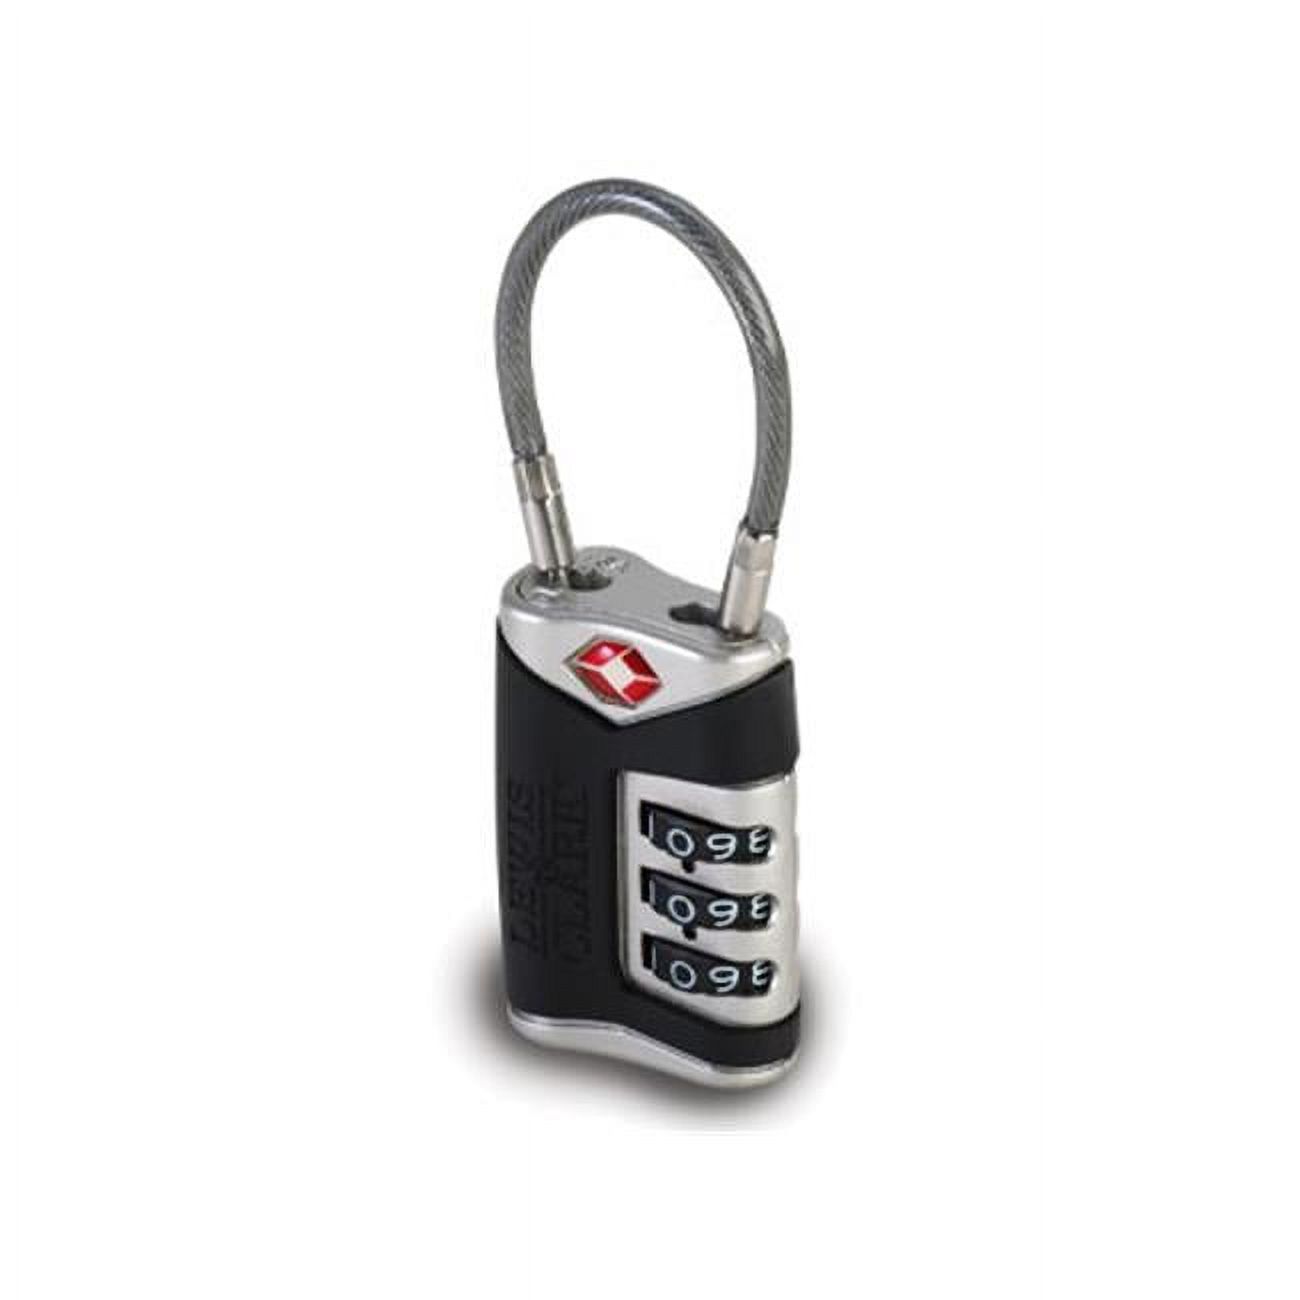 Travel Sentry Cable Lock, Black - image 1 of 3